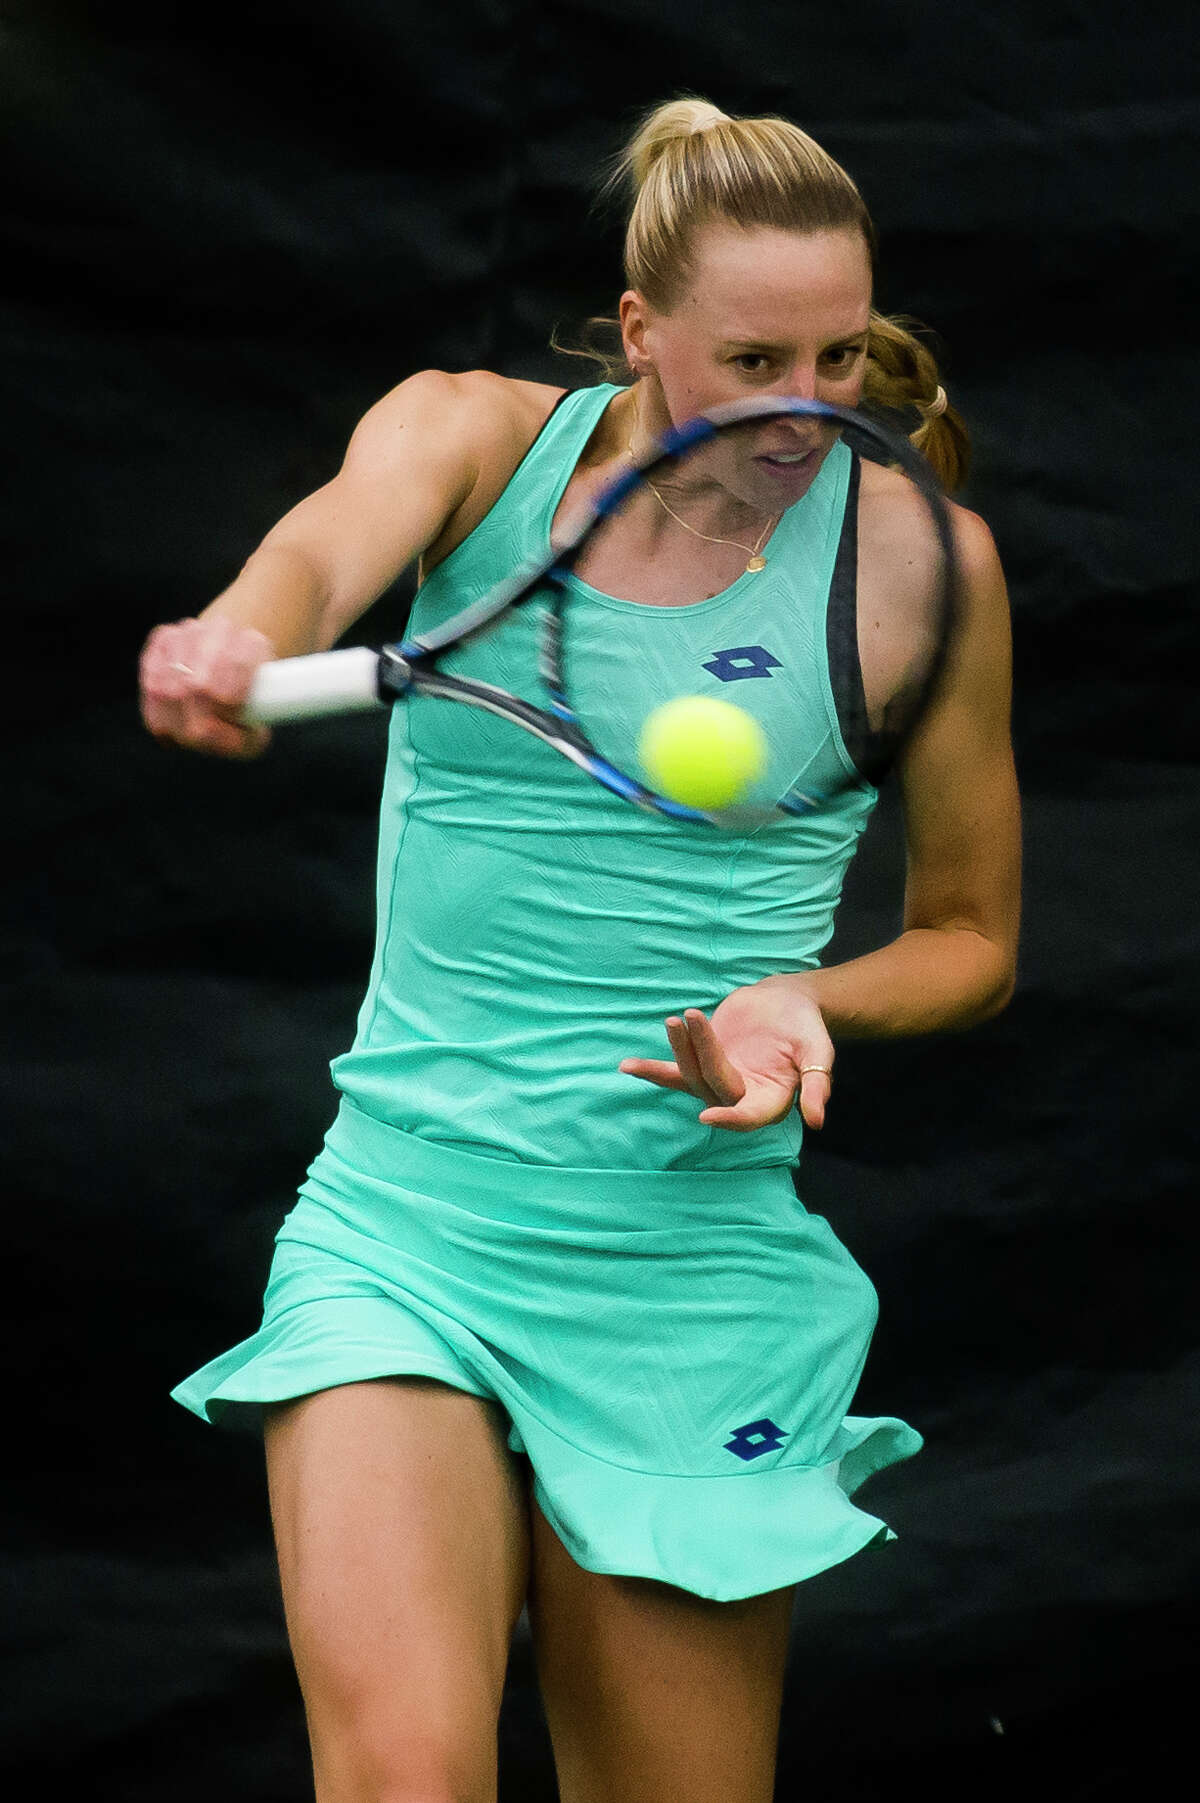 Naomi Broady of the United Kingdom returns the ball in a match against Mihaela Buzarnescu of Romania during the Dow Tennis Classic on Tuesday, Jan. 30, 2018 at the Greater Midland Tennis Center. Buzarnescu won 7-5, 7-5 over Broady. (Katy Kildee/kkildee@mdn.net)